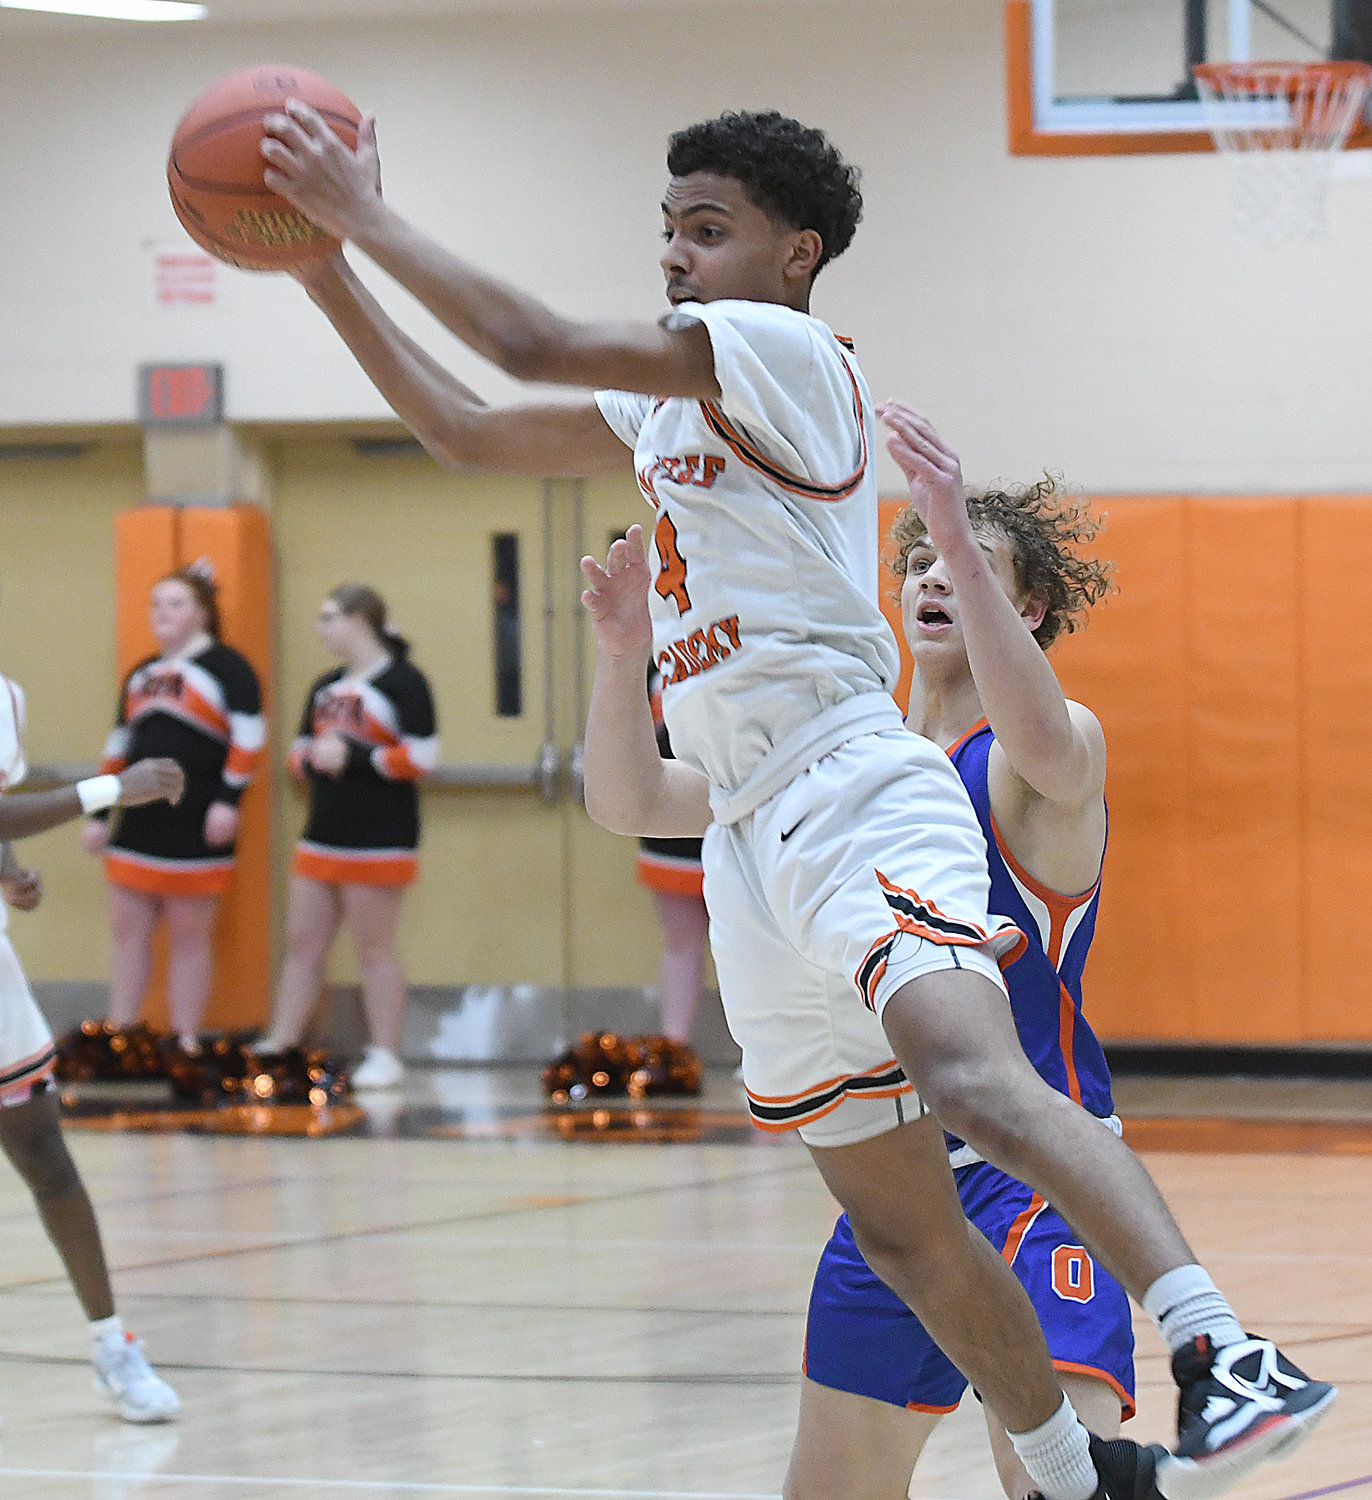 Rome Free Academy freshman guard Surafia Norries picks off a pass in front of Oneida’s Austin Degroat in the first half Friday night at RFA. Degroat led Oneida with 22 points but the Black Knights won 95-80.